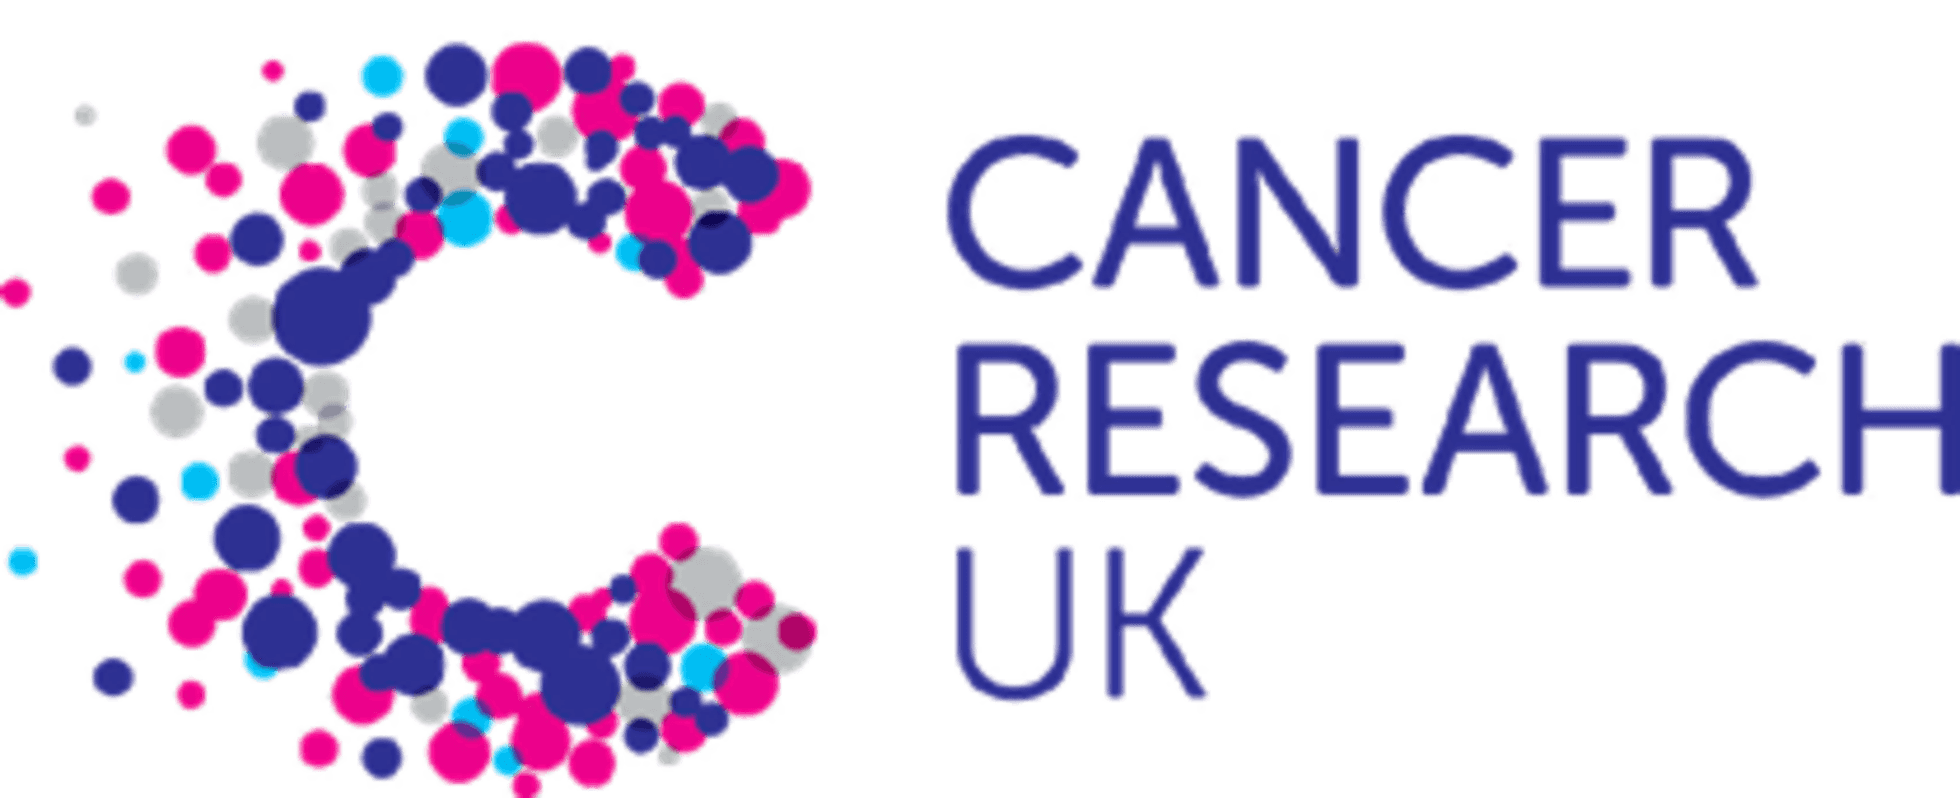 Cancer Research Logo   web